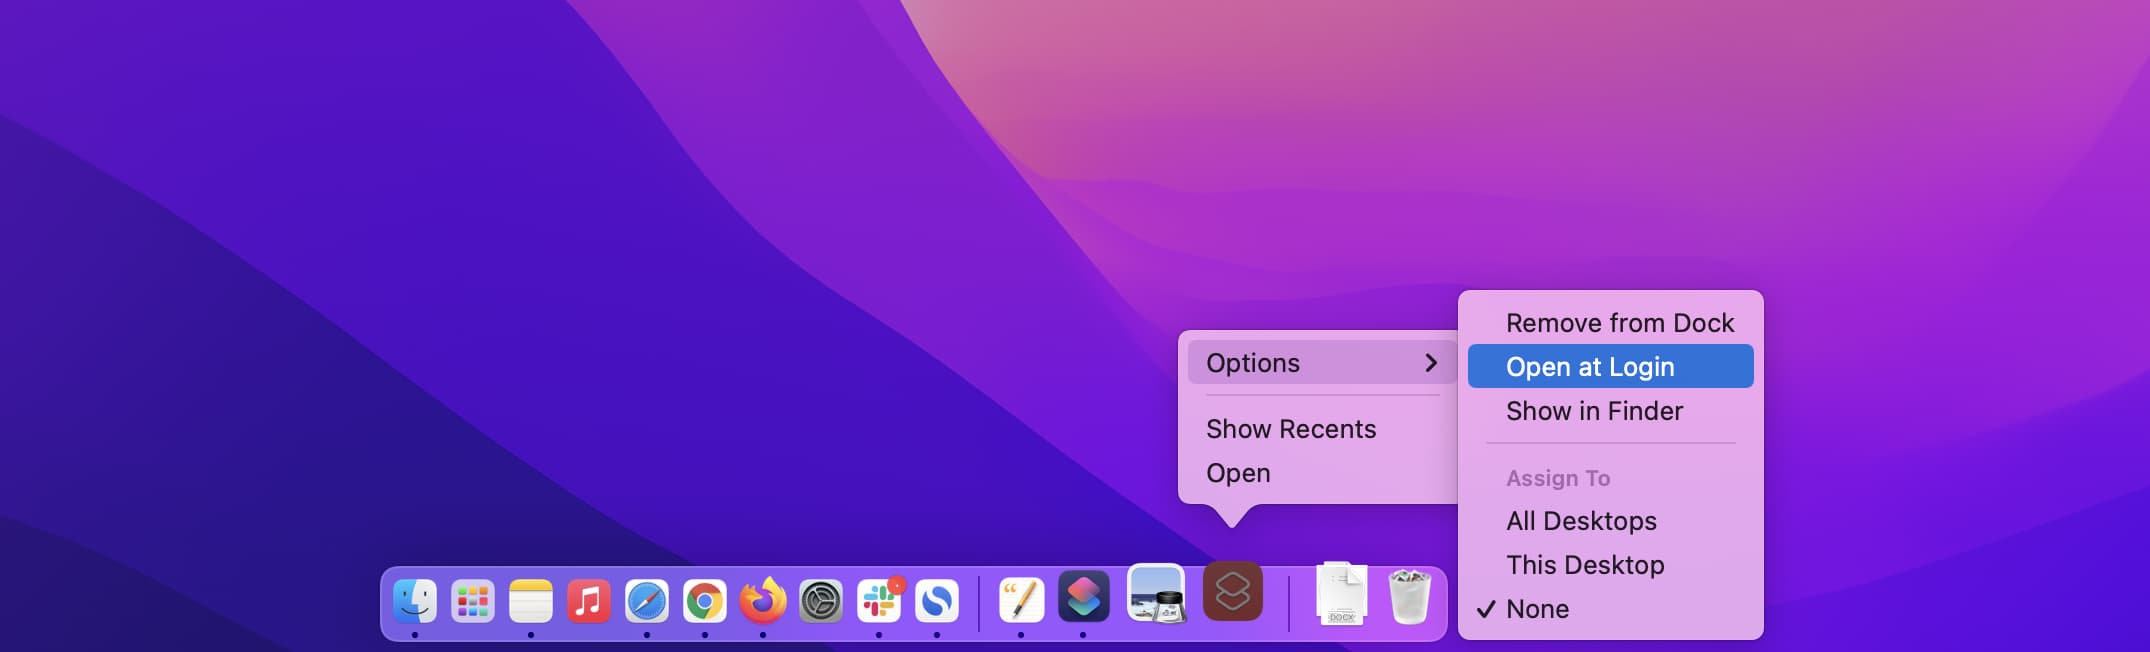 Automatically open shortcut at login on Mac